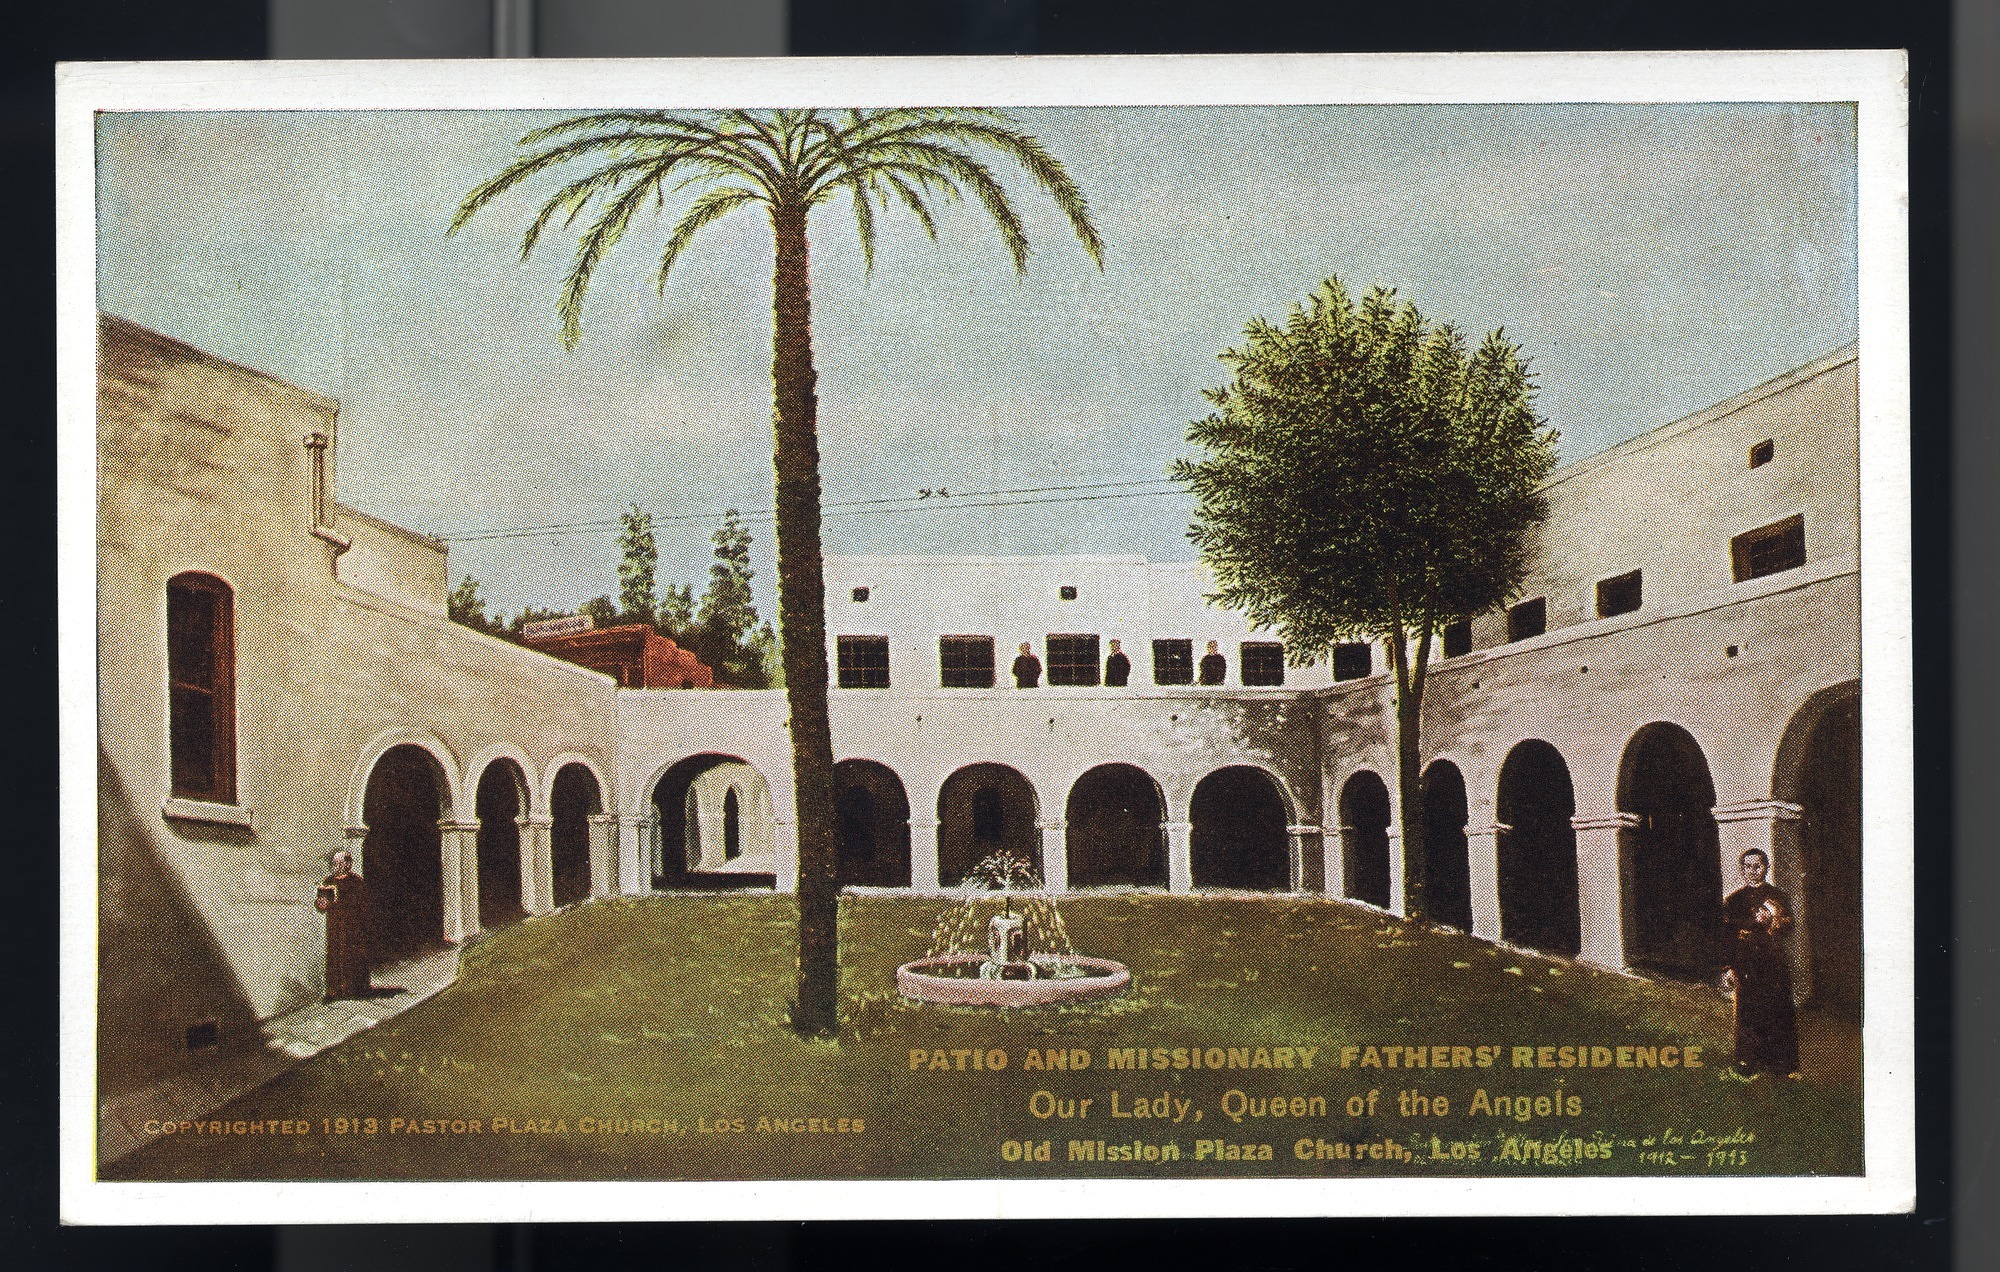 Postcard 67 – Patio and Missionary Fathers' Residence, Our Lady, Queen of the Angels, Old Mission Plaza Church, Los Angeles. George Rice & Sons. ca 1913. NMAH 1986.0639.0679.